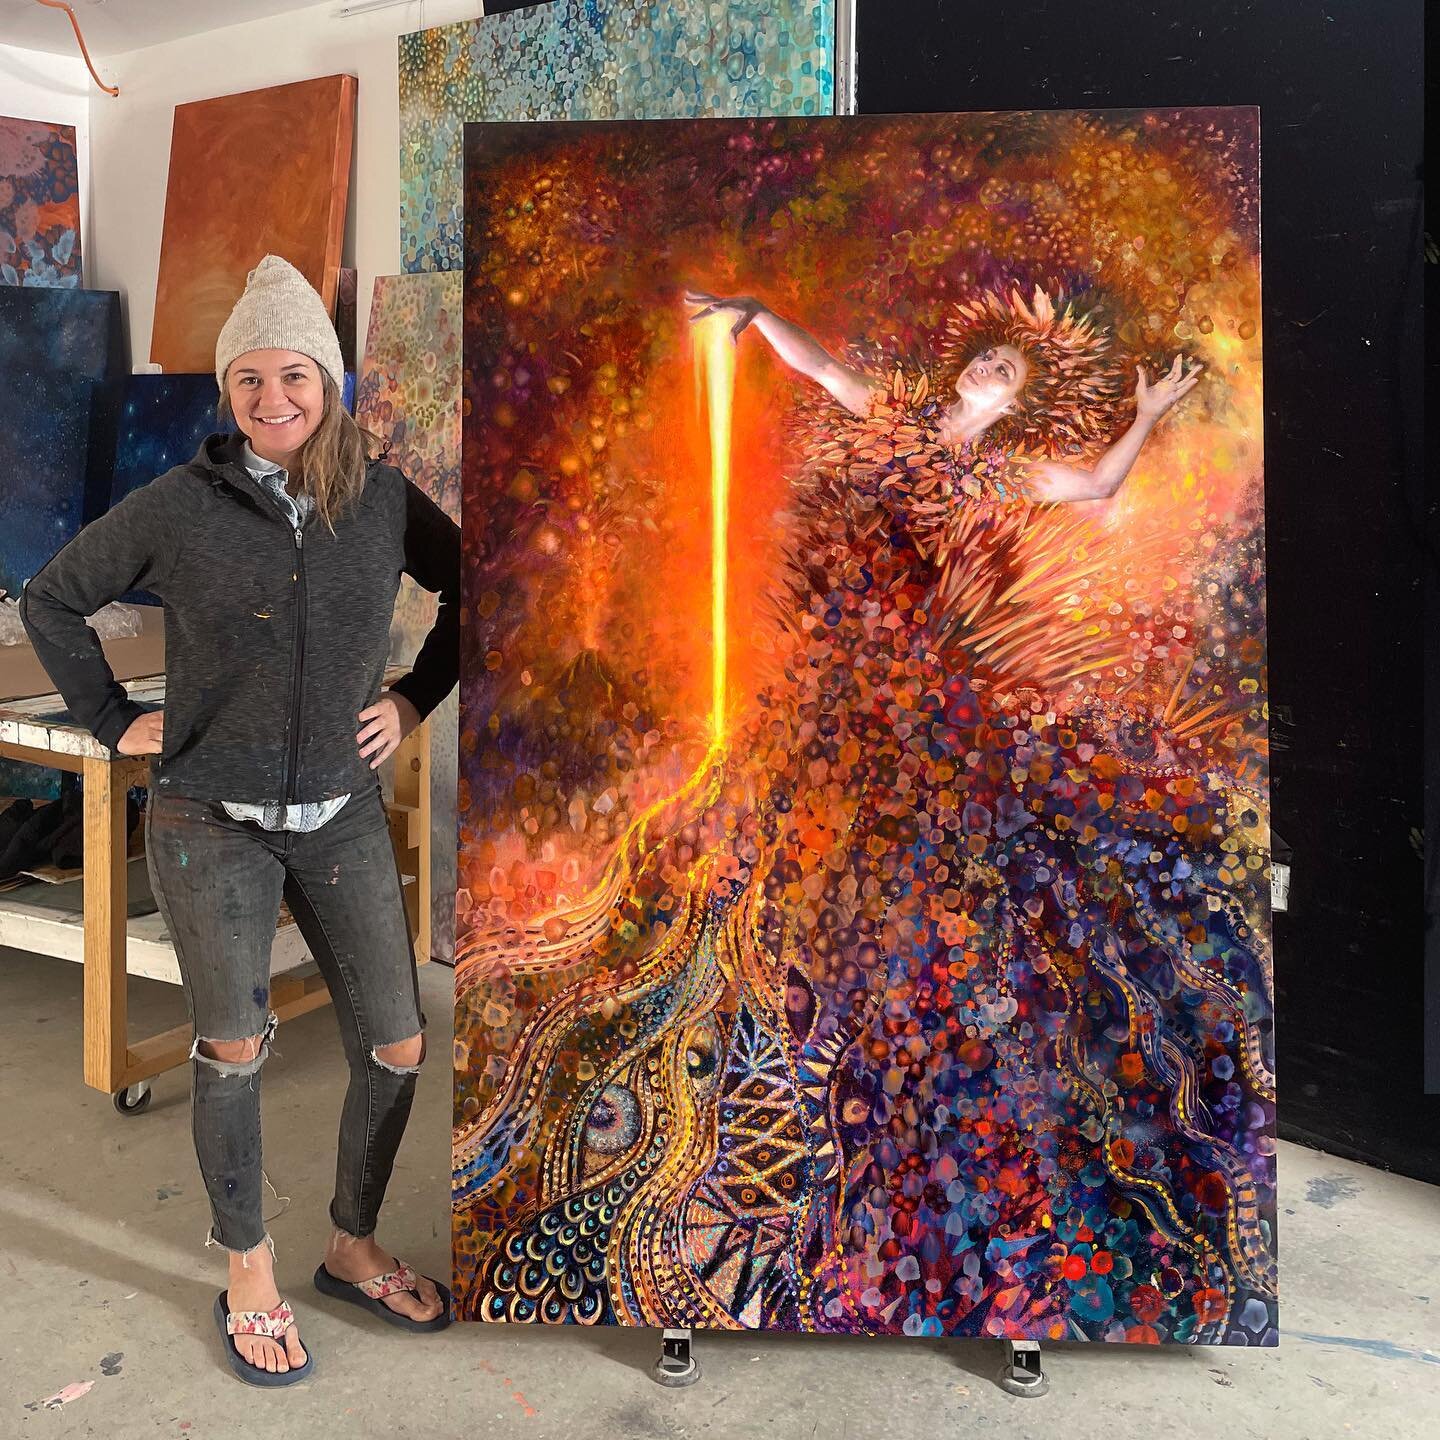 New original! &ldquo;Goddess is Fire&rdquo;
 72x48 inch commission. Woohoo!!
Original sold. 

Special thanks to my friend Morika for modeling for this otherworldly #volcano 🔥#god. I combined three techniques into this one painting: fingerpainting (b